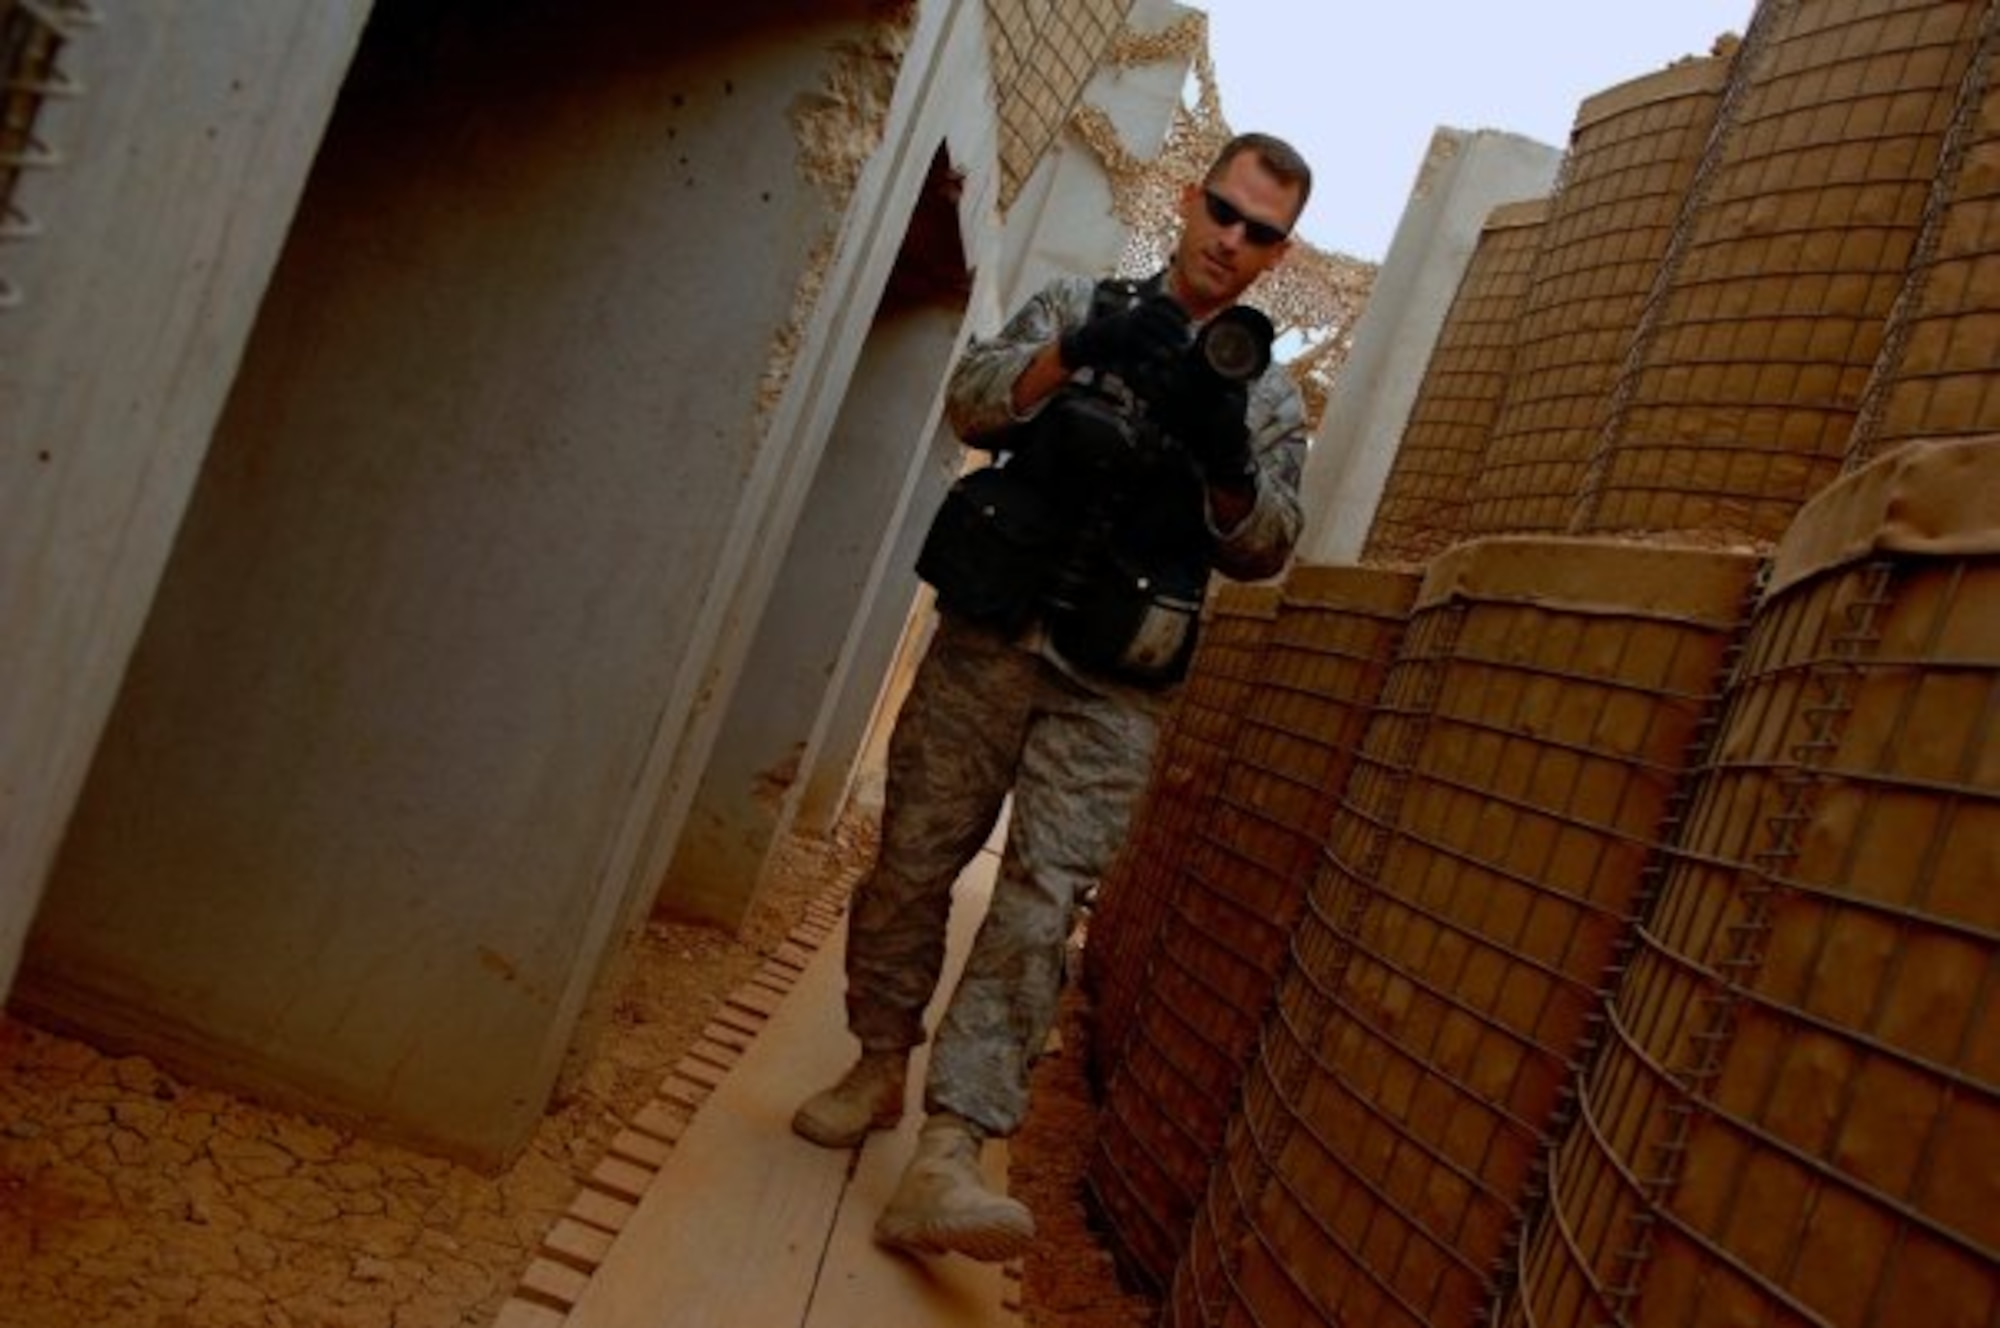 Master Sgt. Andy Dunaway, shown here documenting events in Iraq in 2006, is an aerial combat photojournalist assigned to the 1st Combat Camera Squadron from Charleston Air Force Base, S.C. (U.S. Air Force photo/ Master Sgt. Jeff Allen)